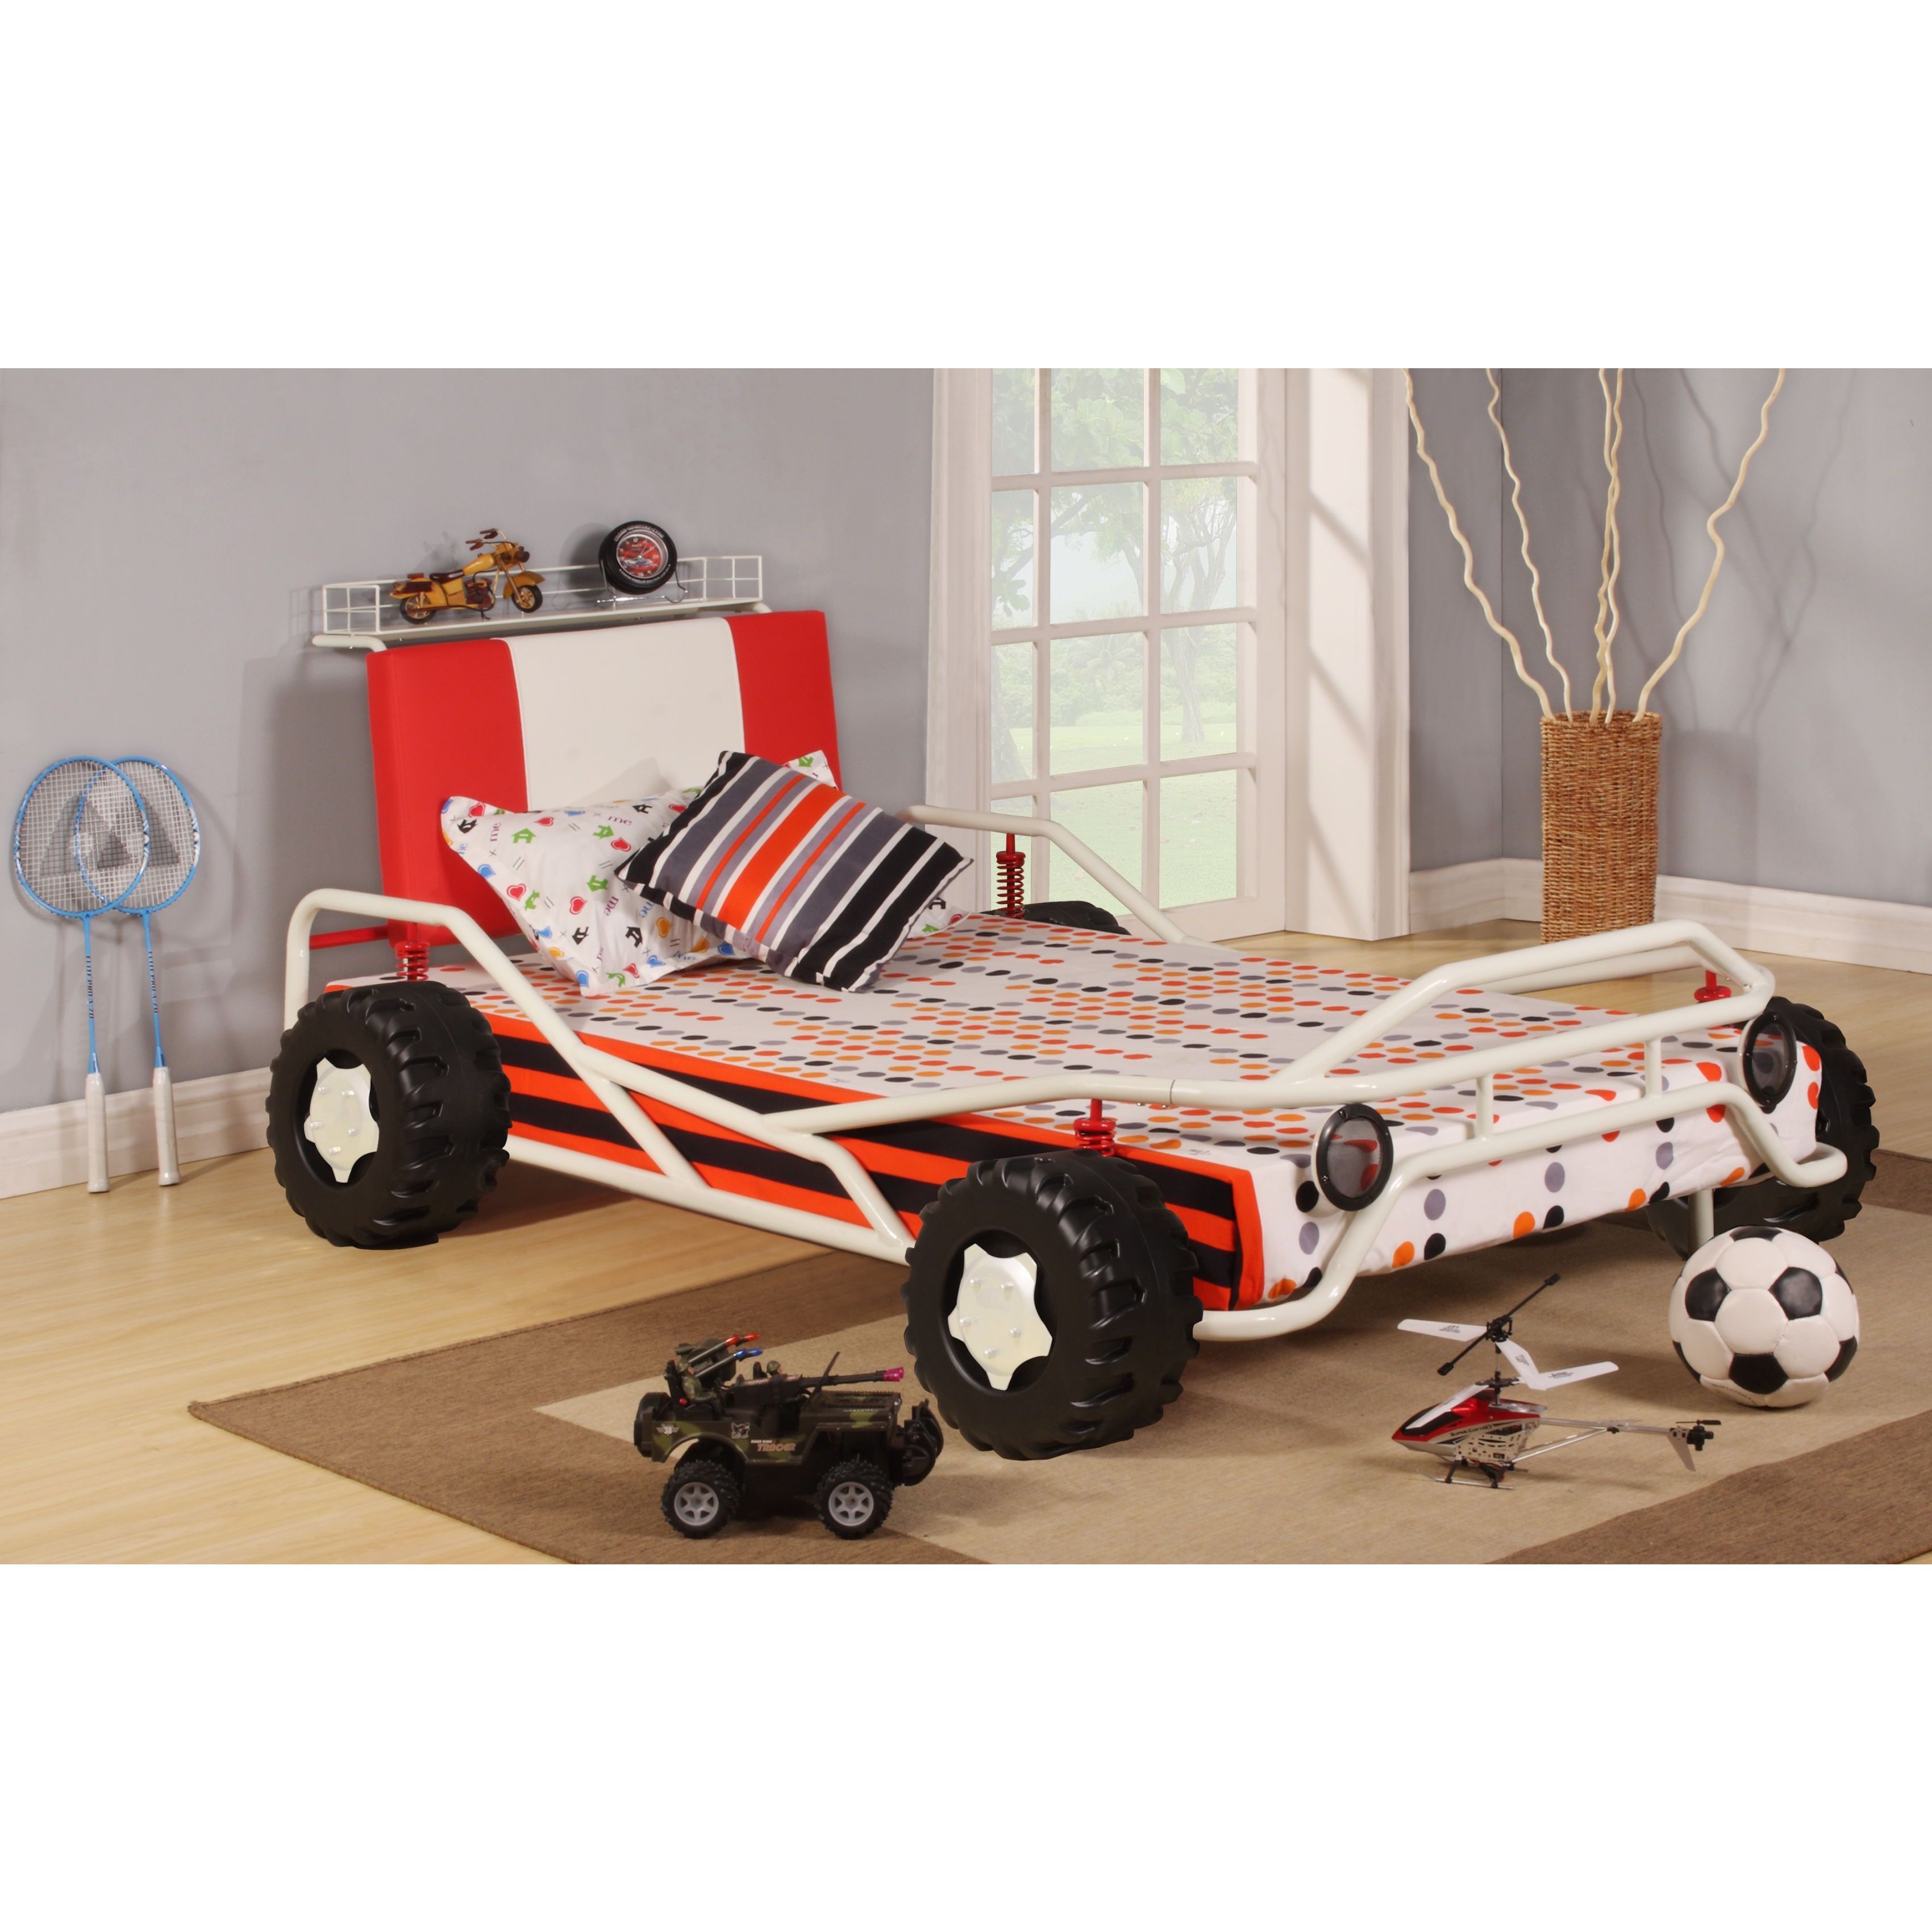 twin size car bed frame